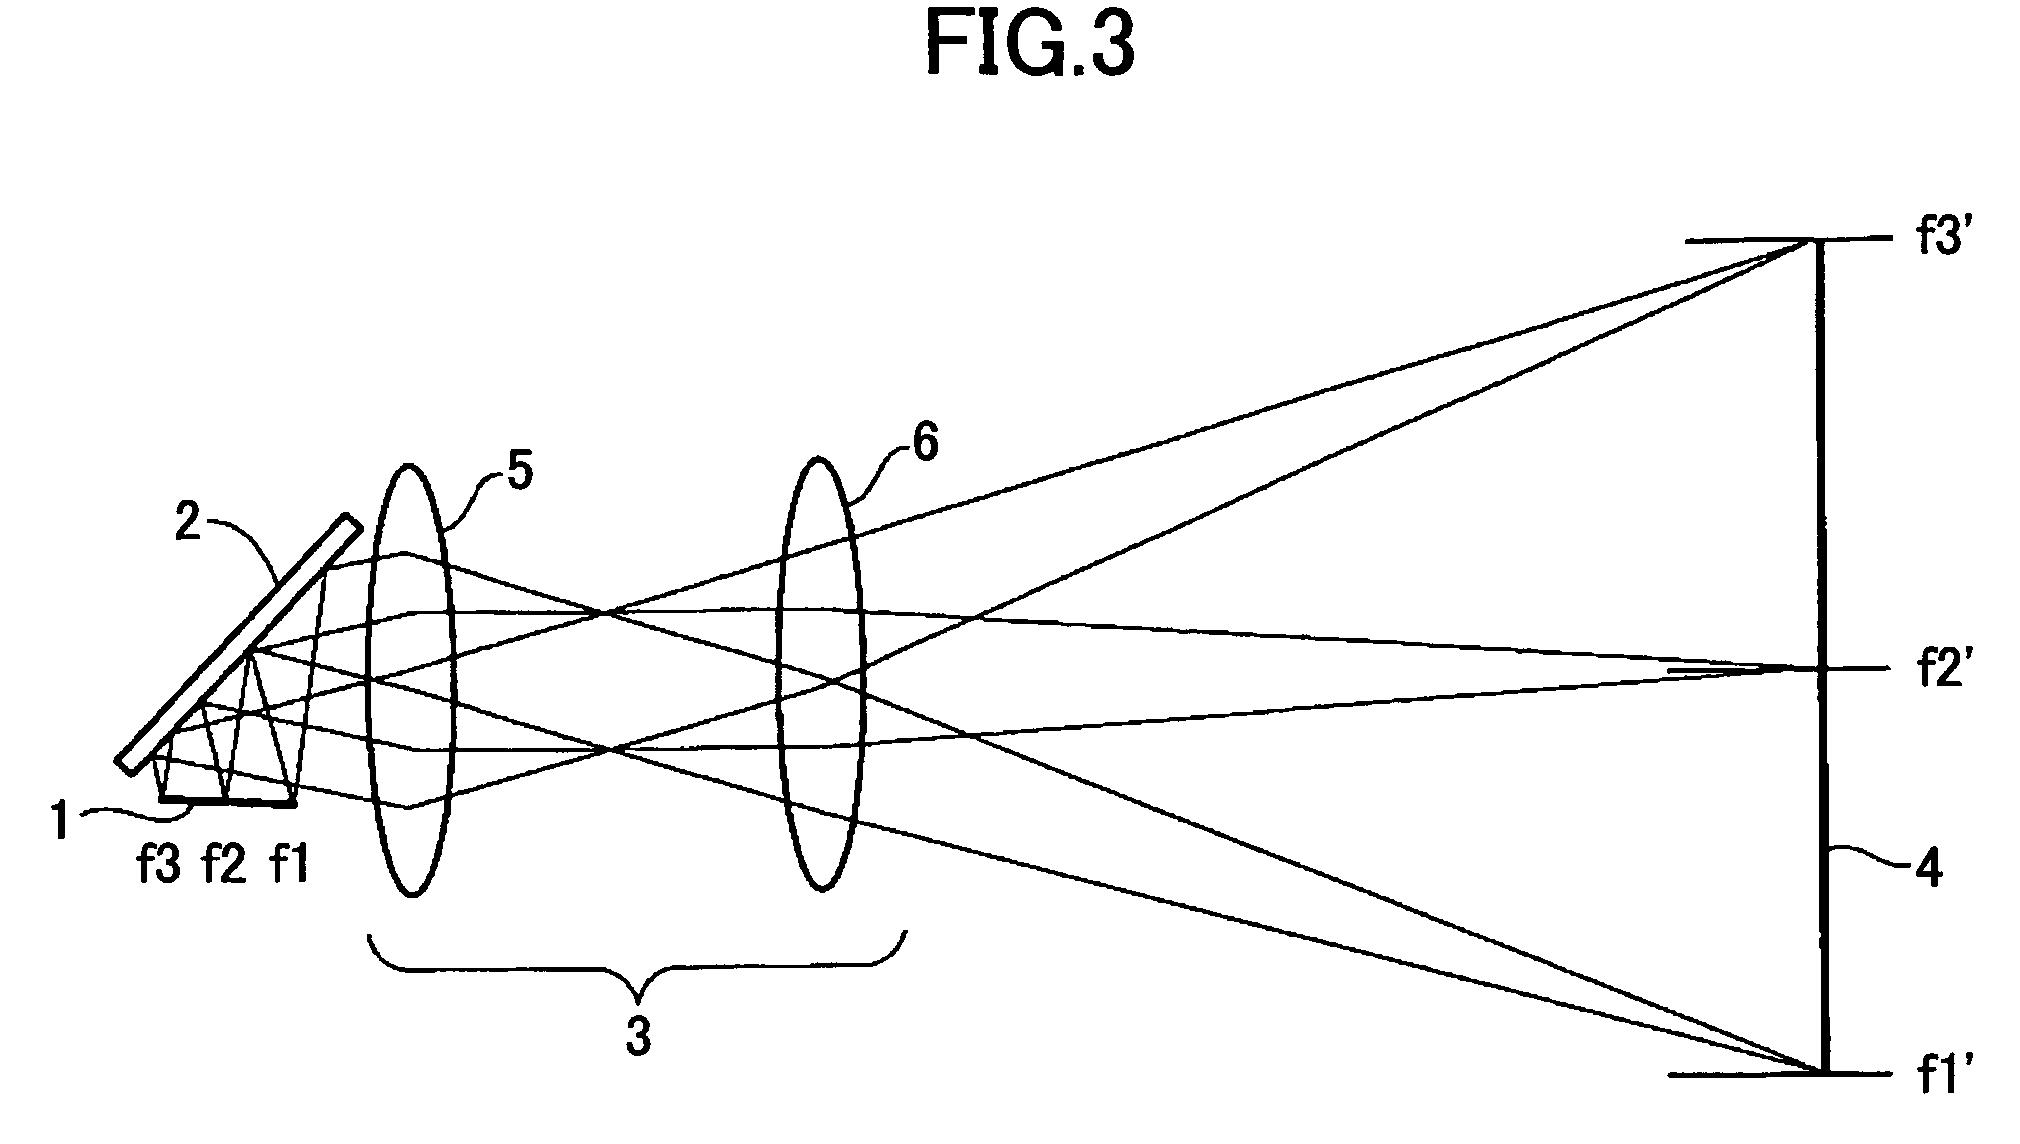 Image display apparatus and projection optical system